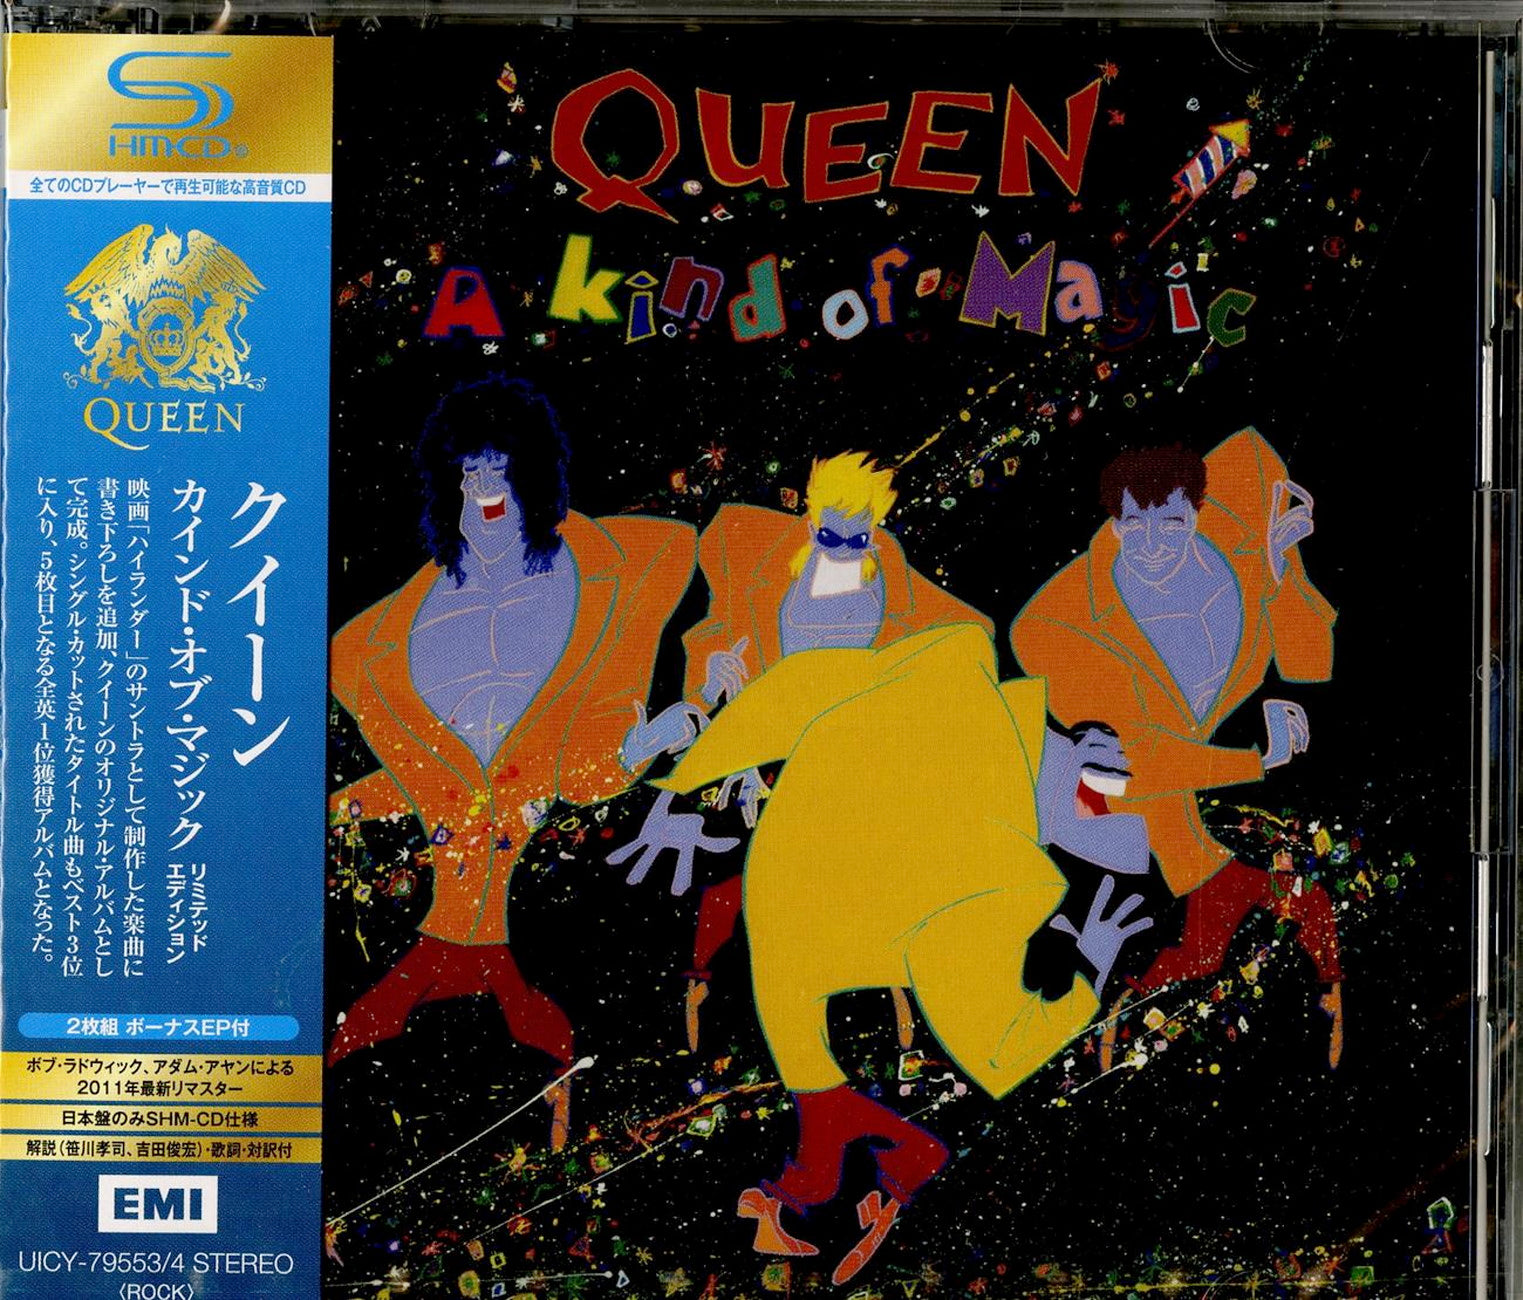 Queen - A Kind Of Magic - Japan 2 SHM-CD Limited Edition – CDs